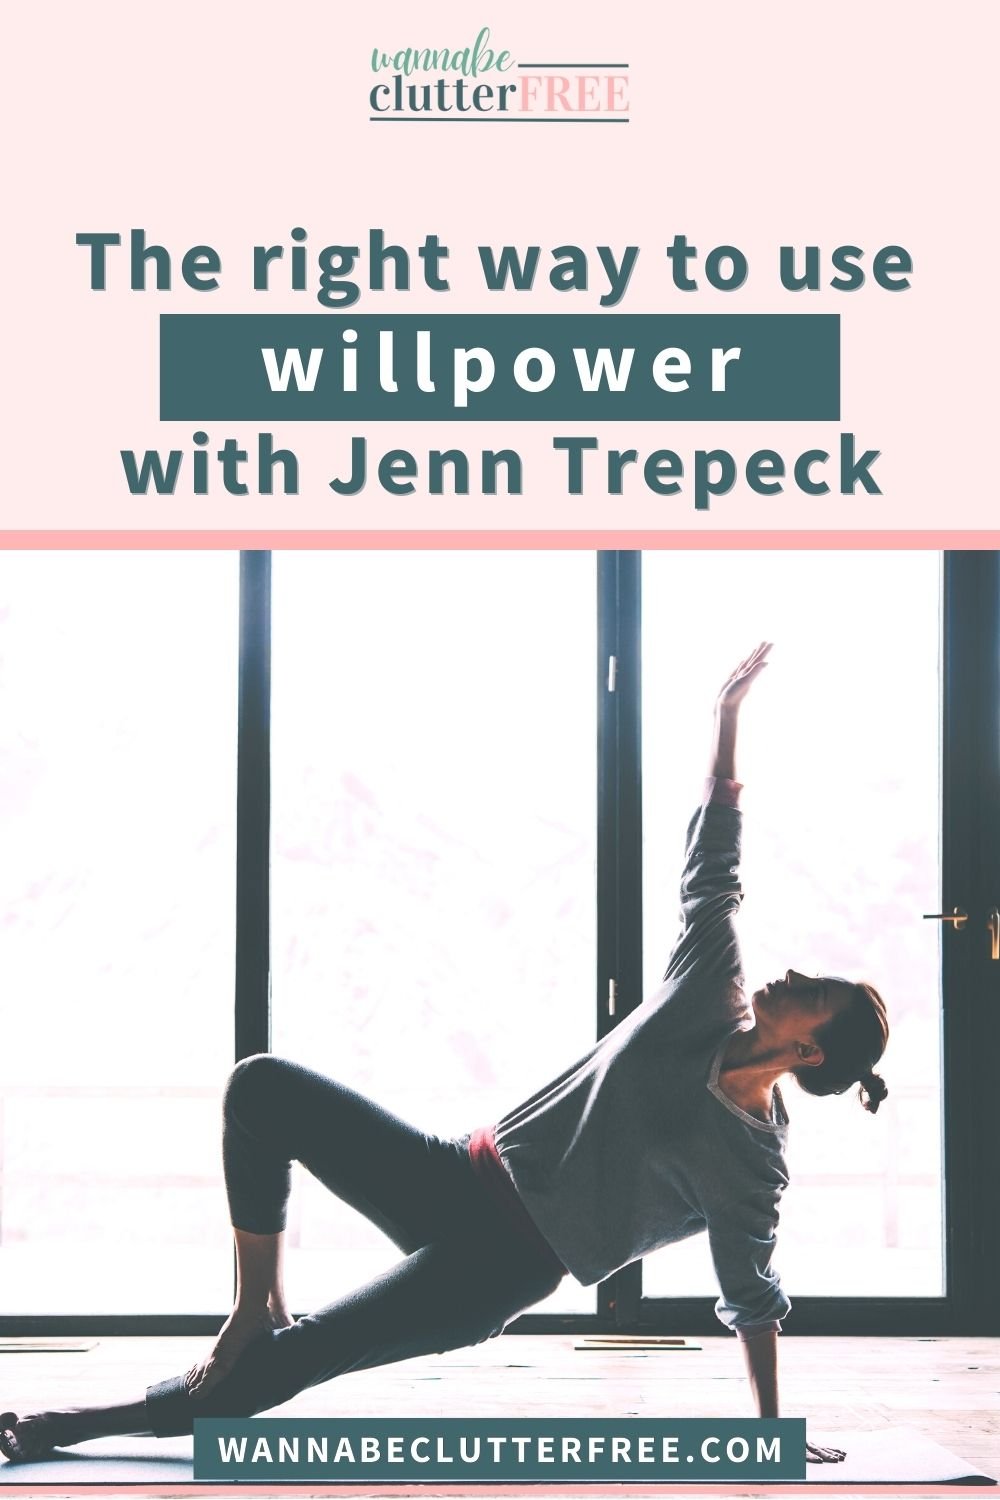 The right way to use willpower